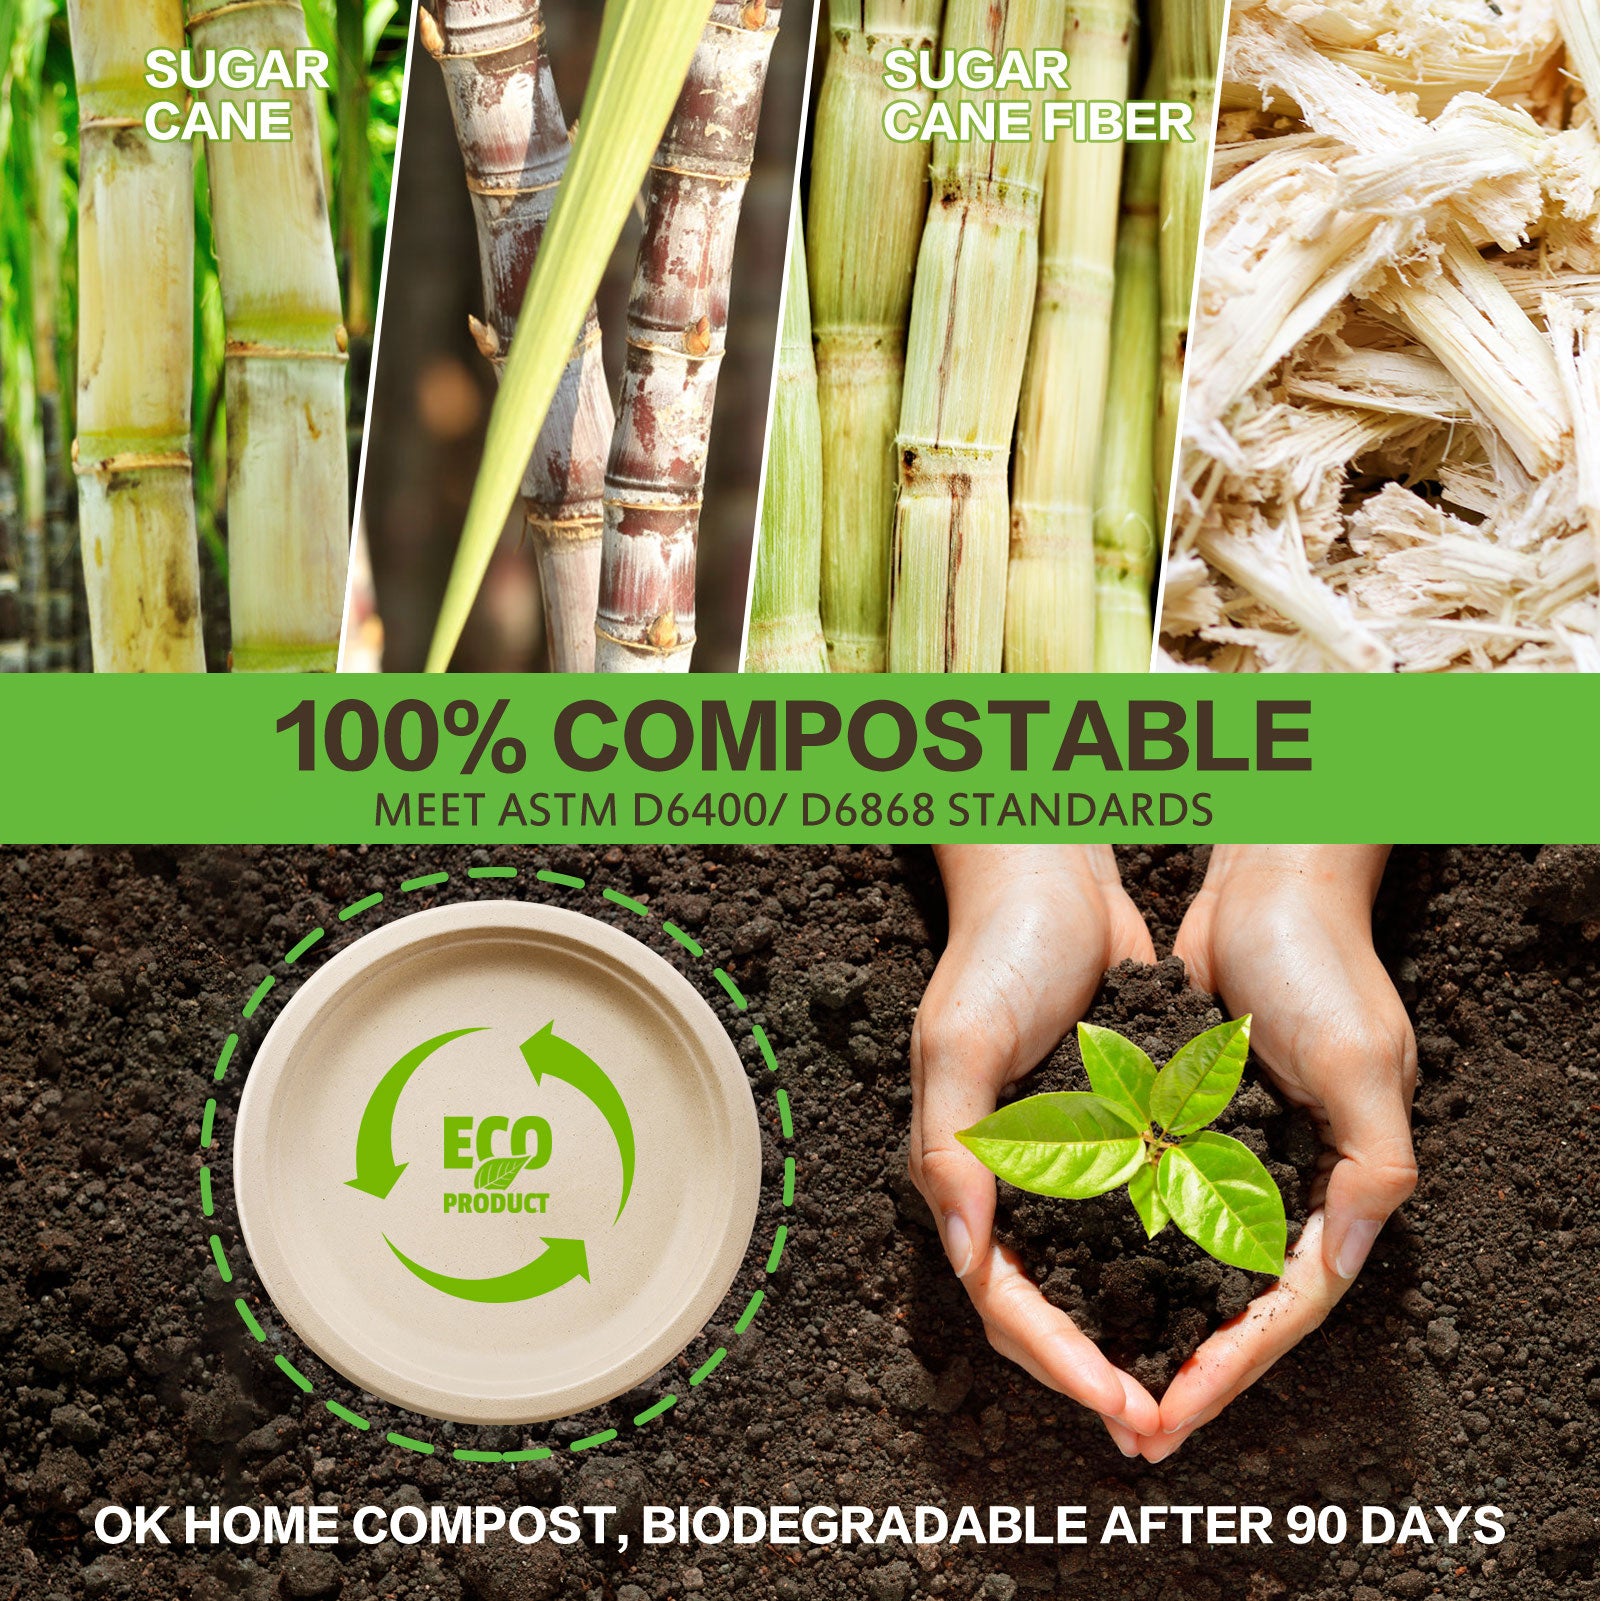  GDJMLai 100% Compostable Paper Plates 8 1/2 Inch [100-Pack]  Heavy Duty Paper Plates Eco Friendly Disposable Plates, Made of Natural  Sugarcane Fibers Biodegradable Plates Microwave & Oven Safe : Everything  Else